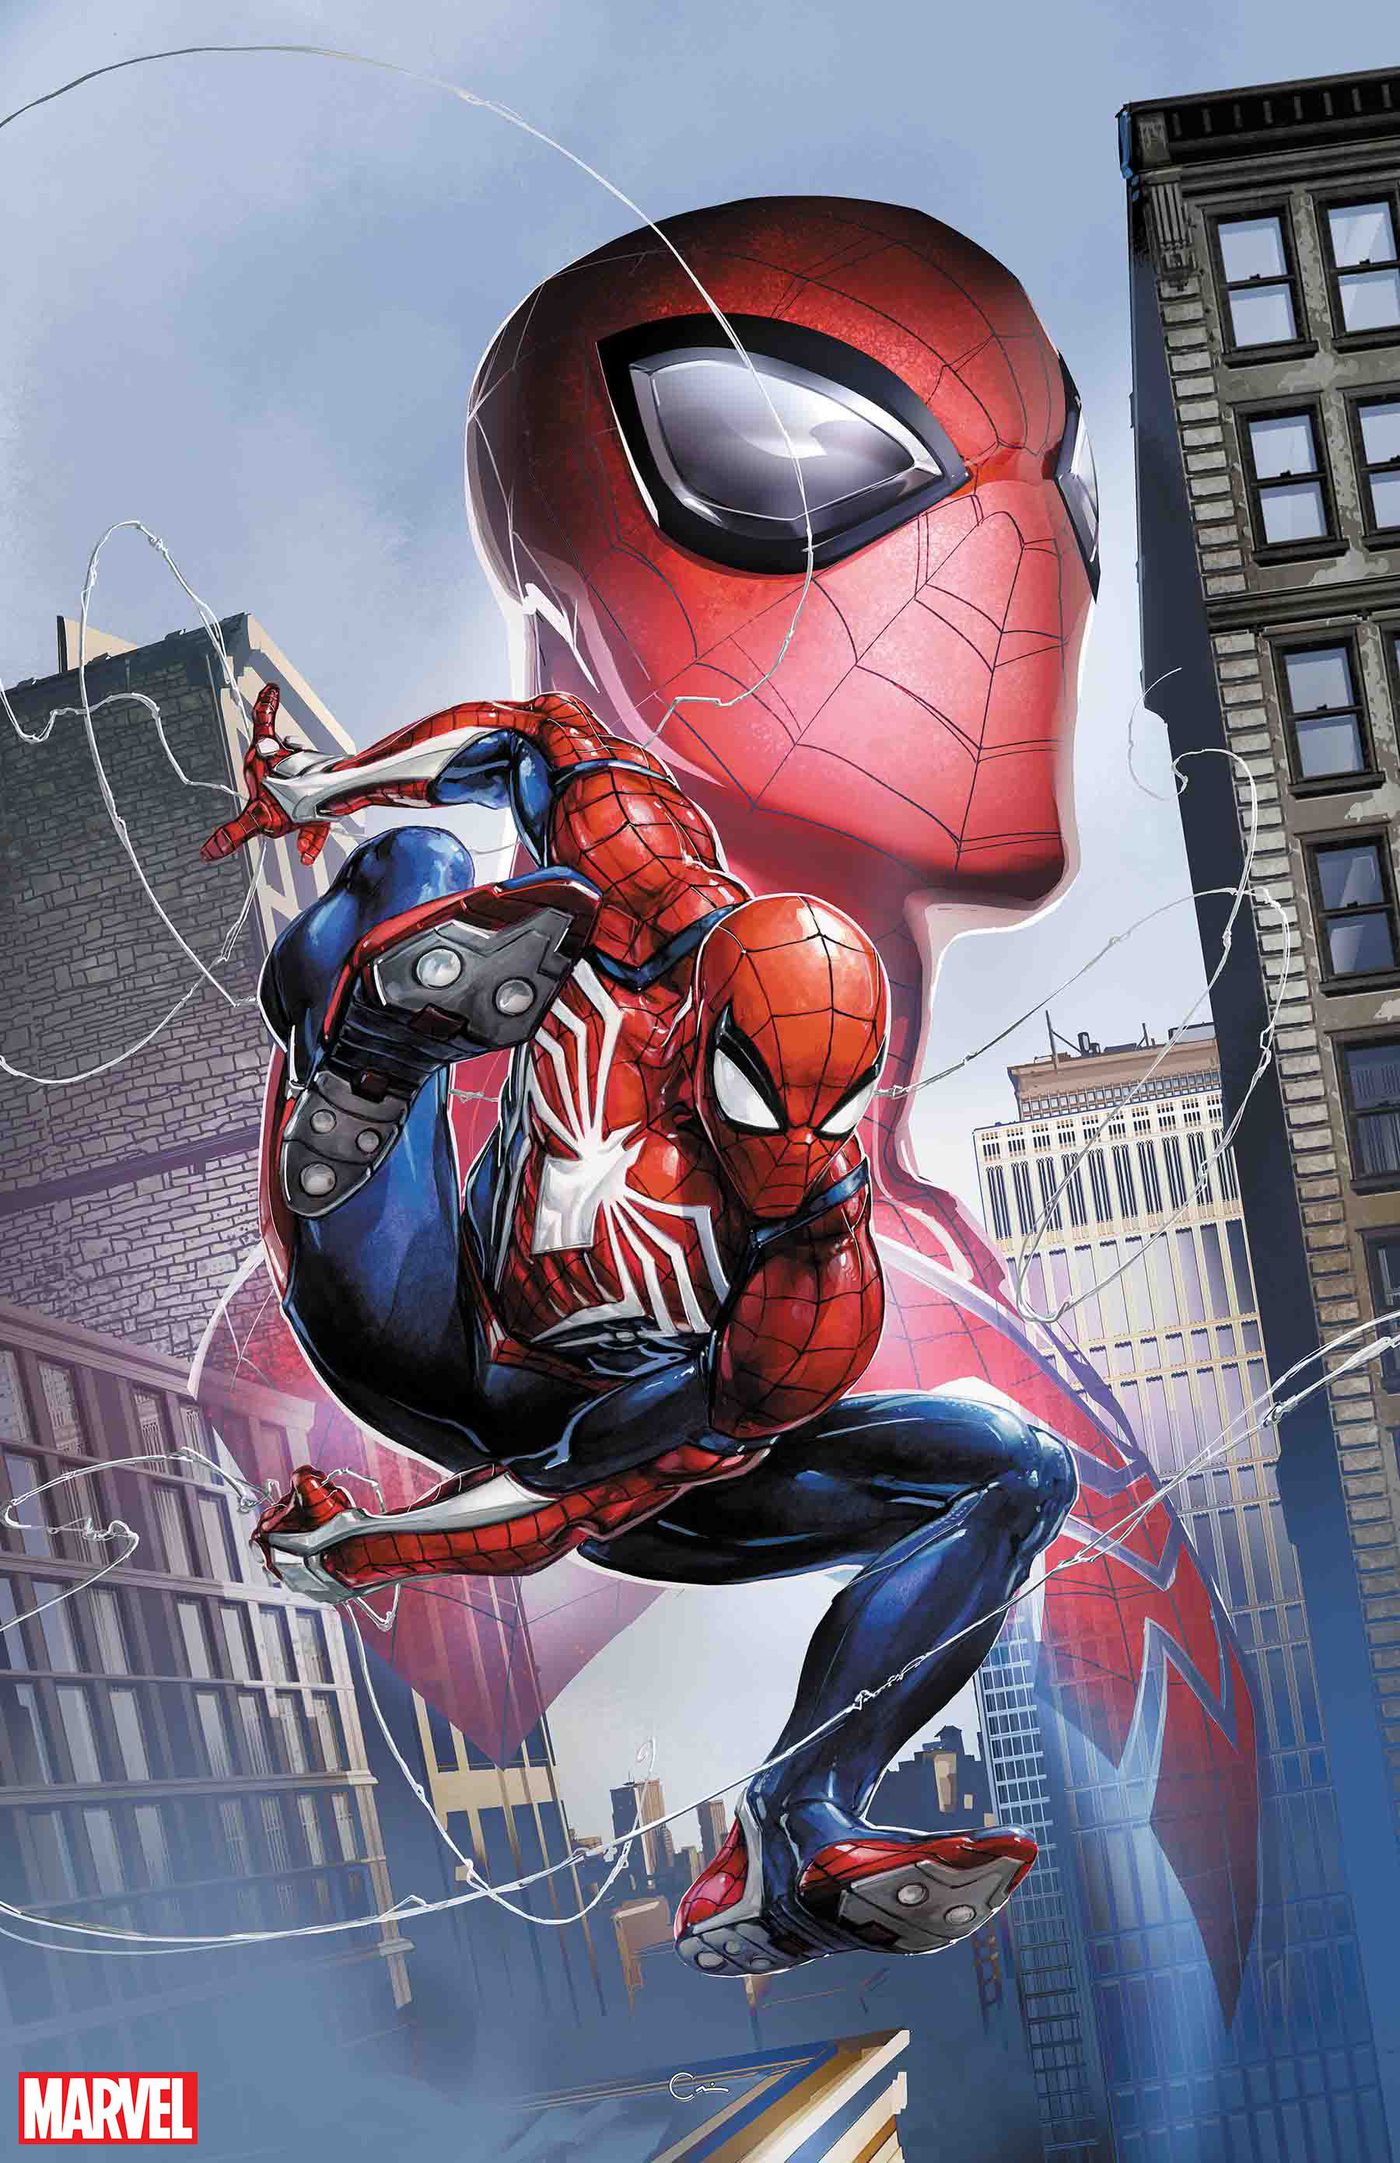 Spider-Man PS4 Officially Joins Marvel Comic Book Canon - GameRevolution